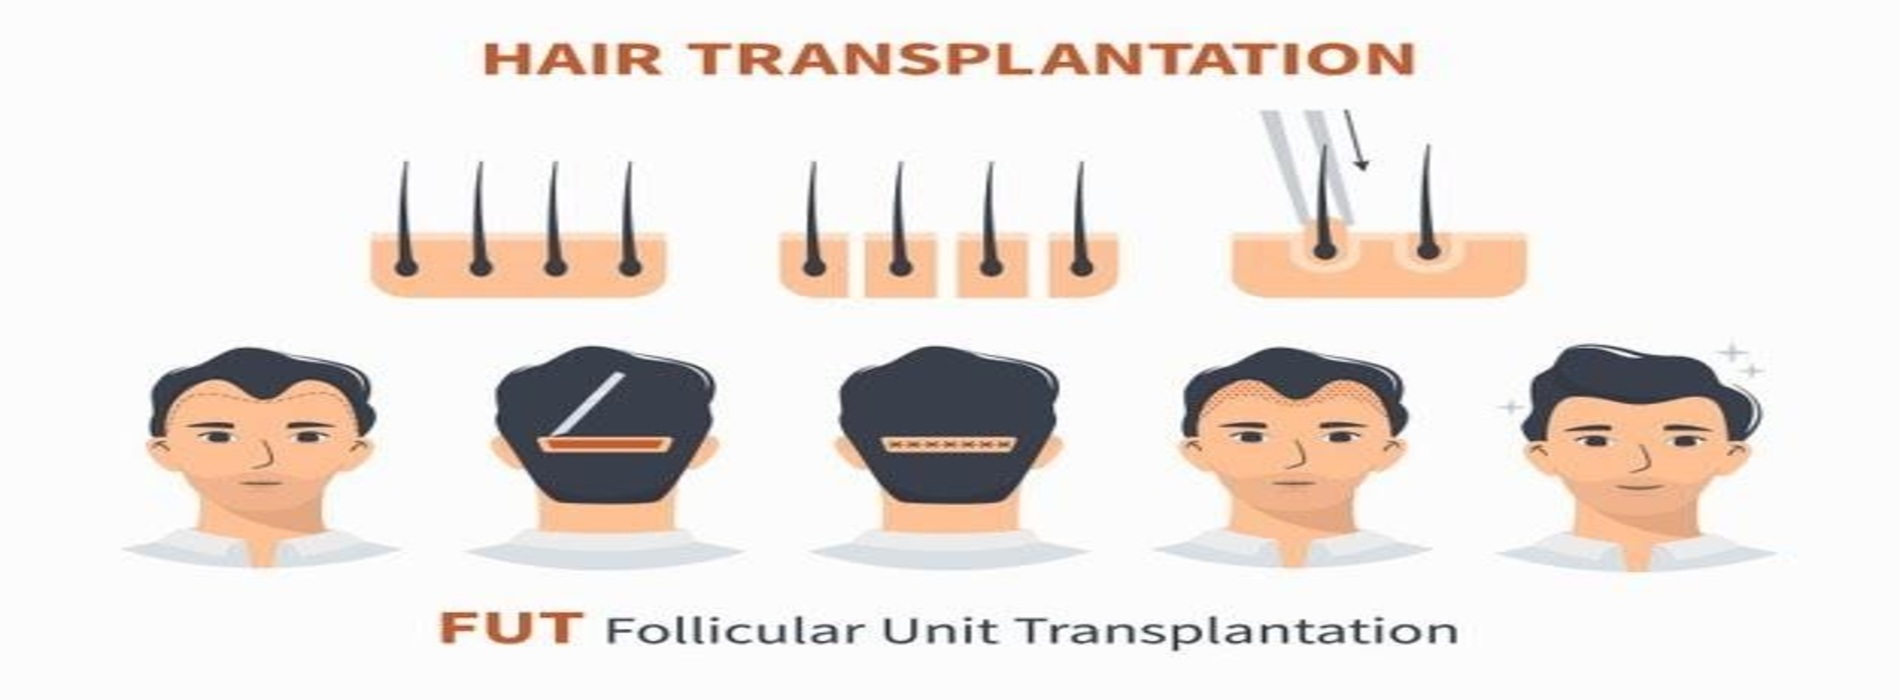 In Jaipur, How Much Does a Hair Transplant Cost?